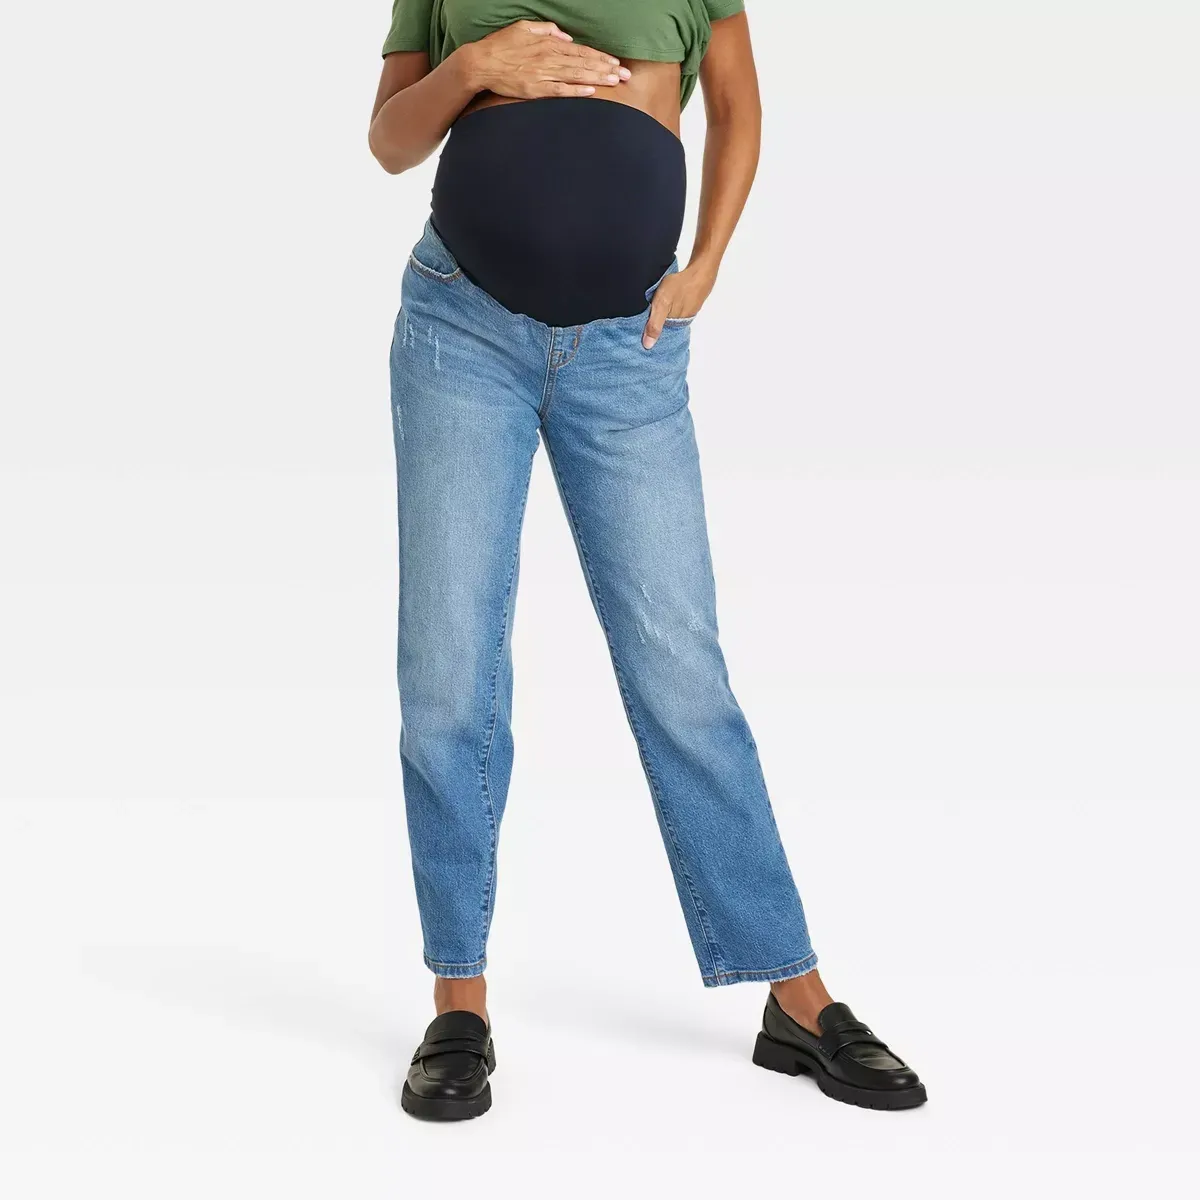 Over Bump Maternity Denim Shorts in Blue by Queen mum